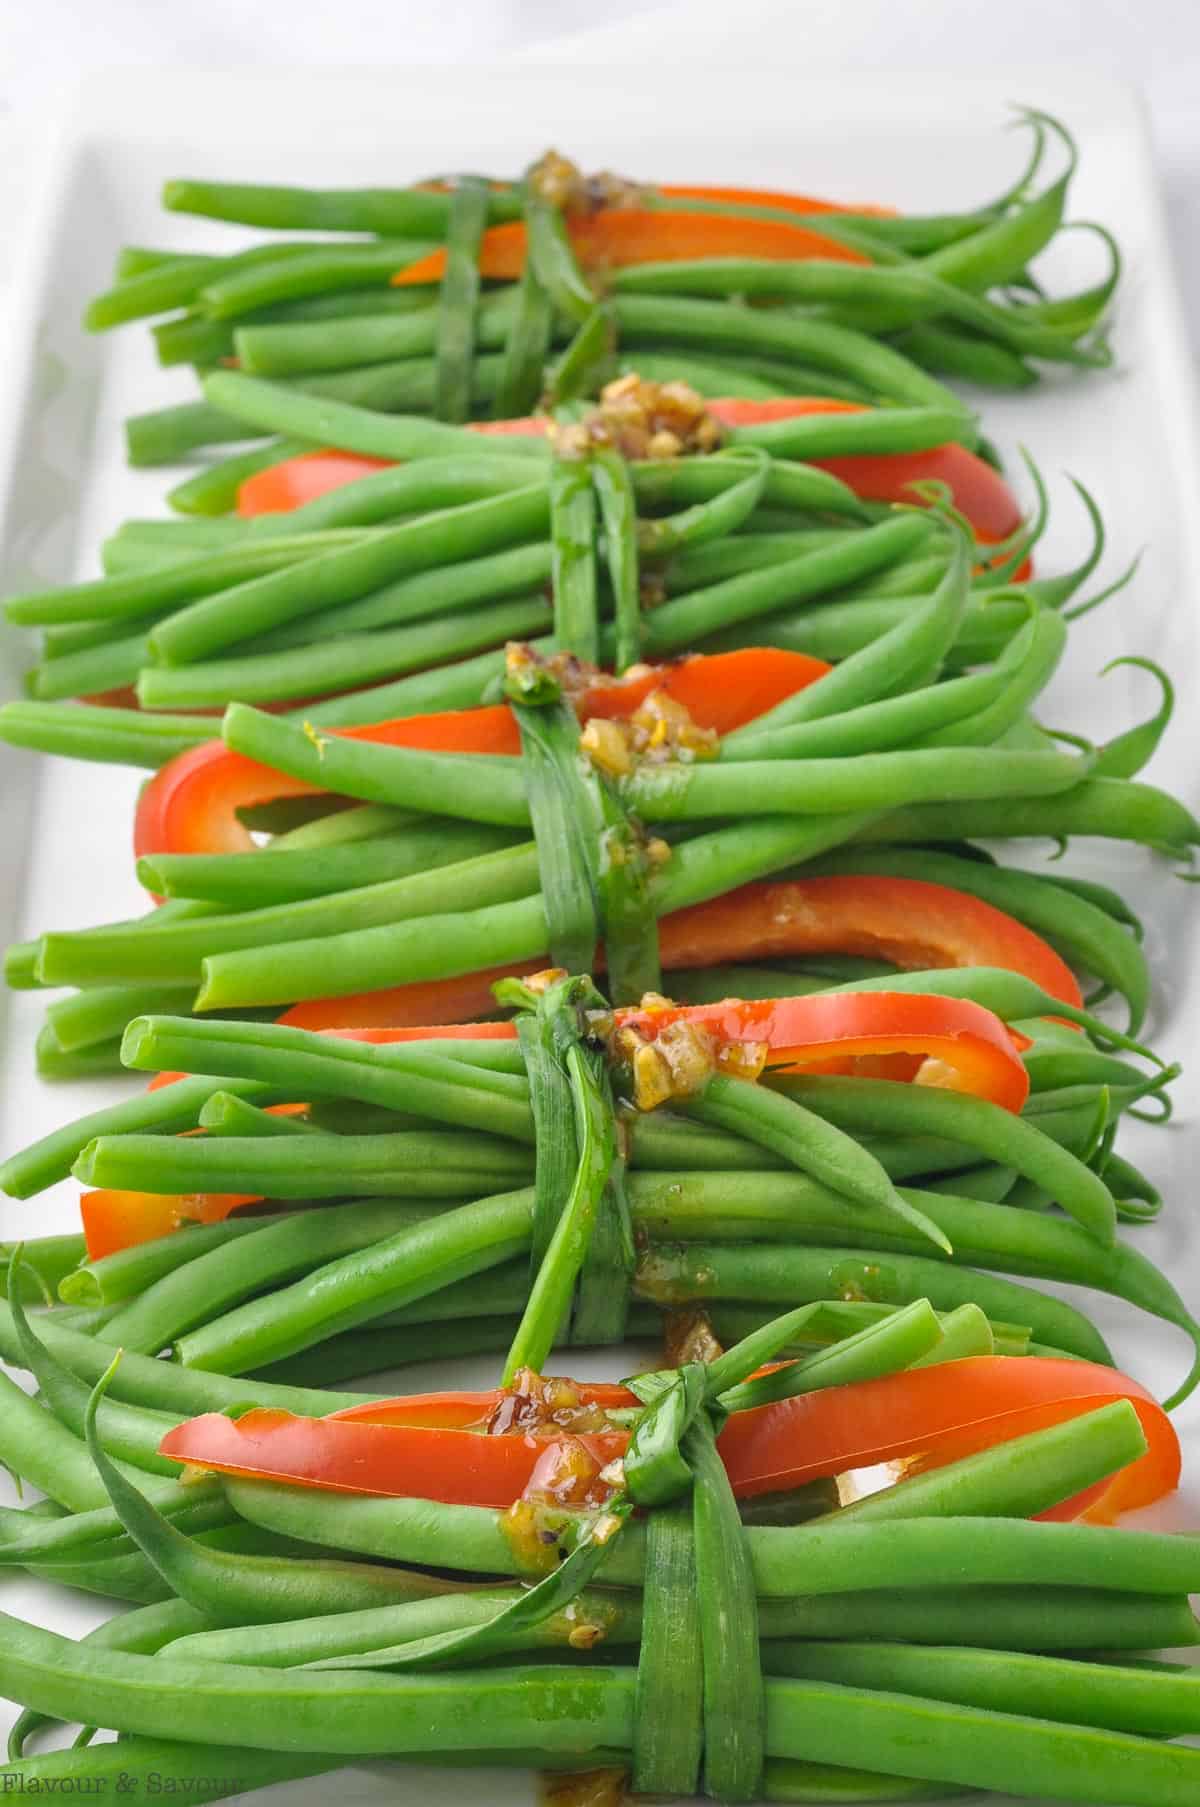 Green bean bundles tied with a chive on a white platter.